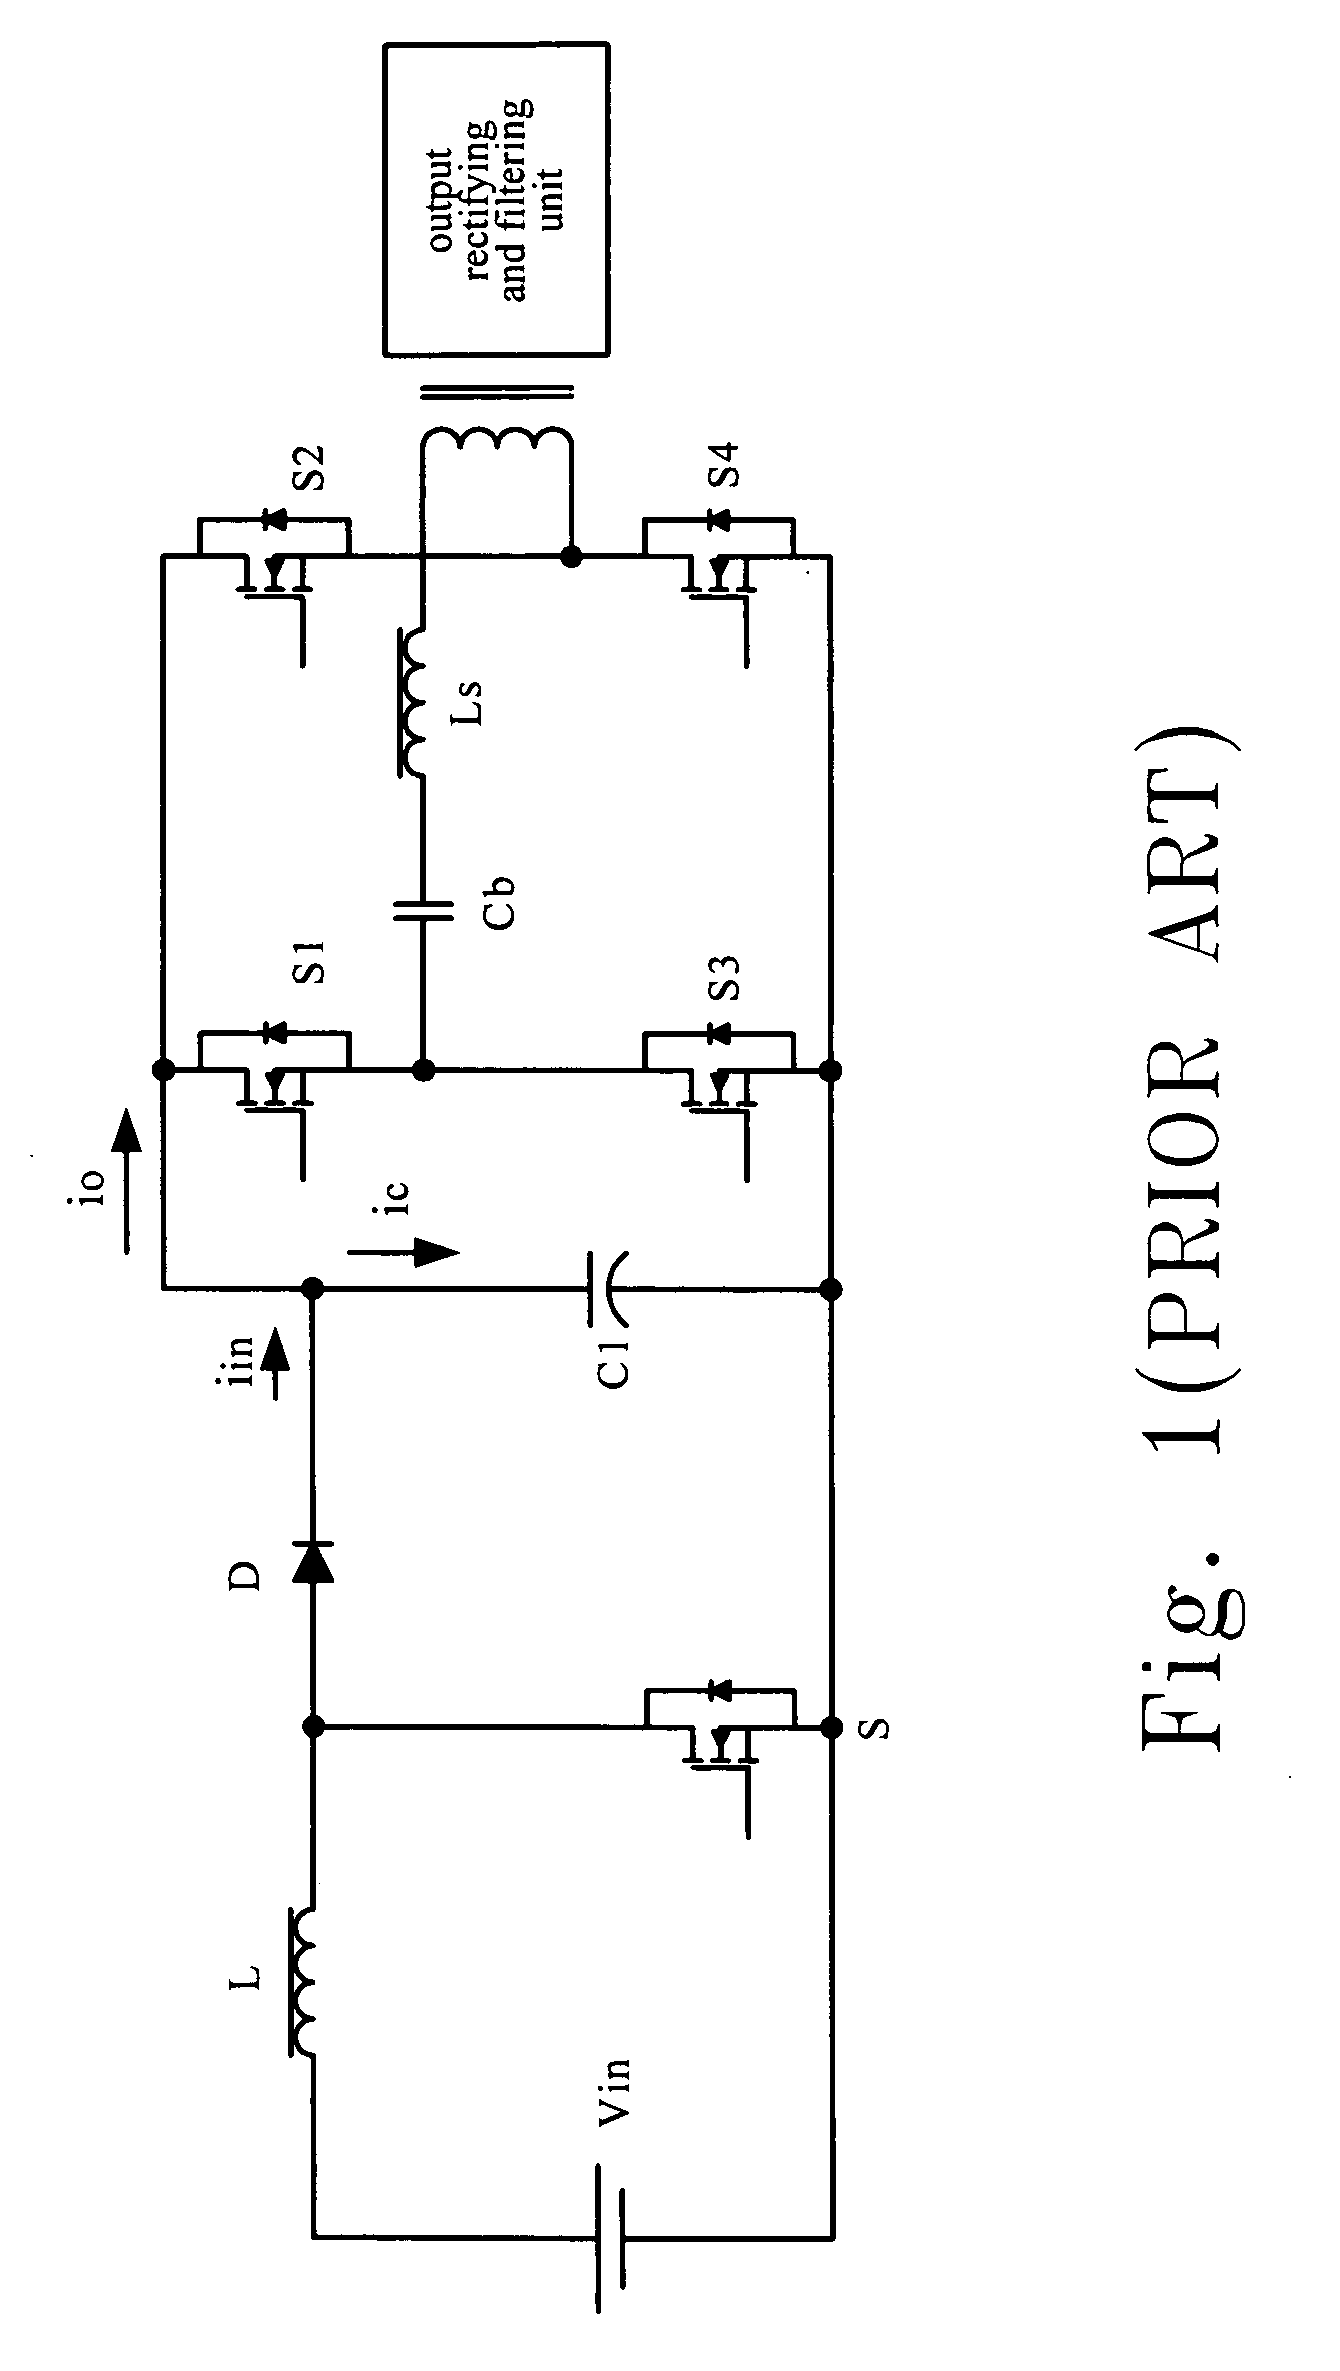 DC-DC converter circuits and method for reducing DC bus capacitor current